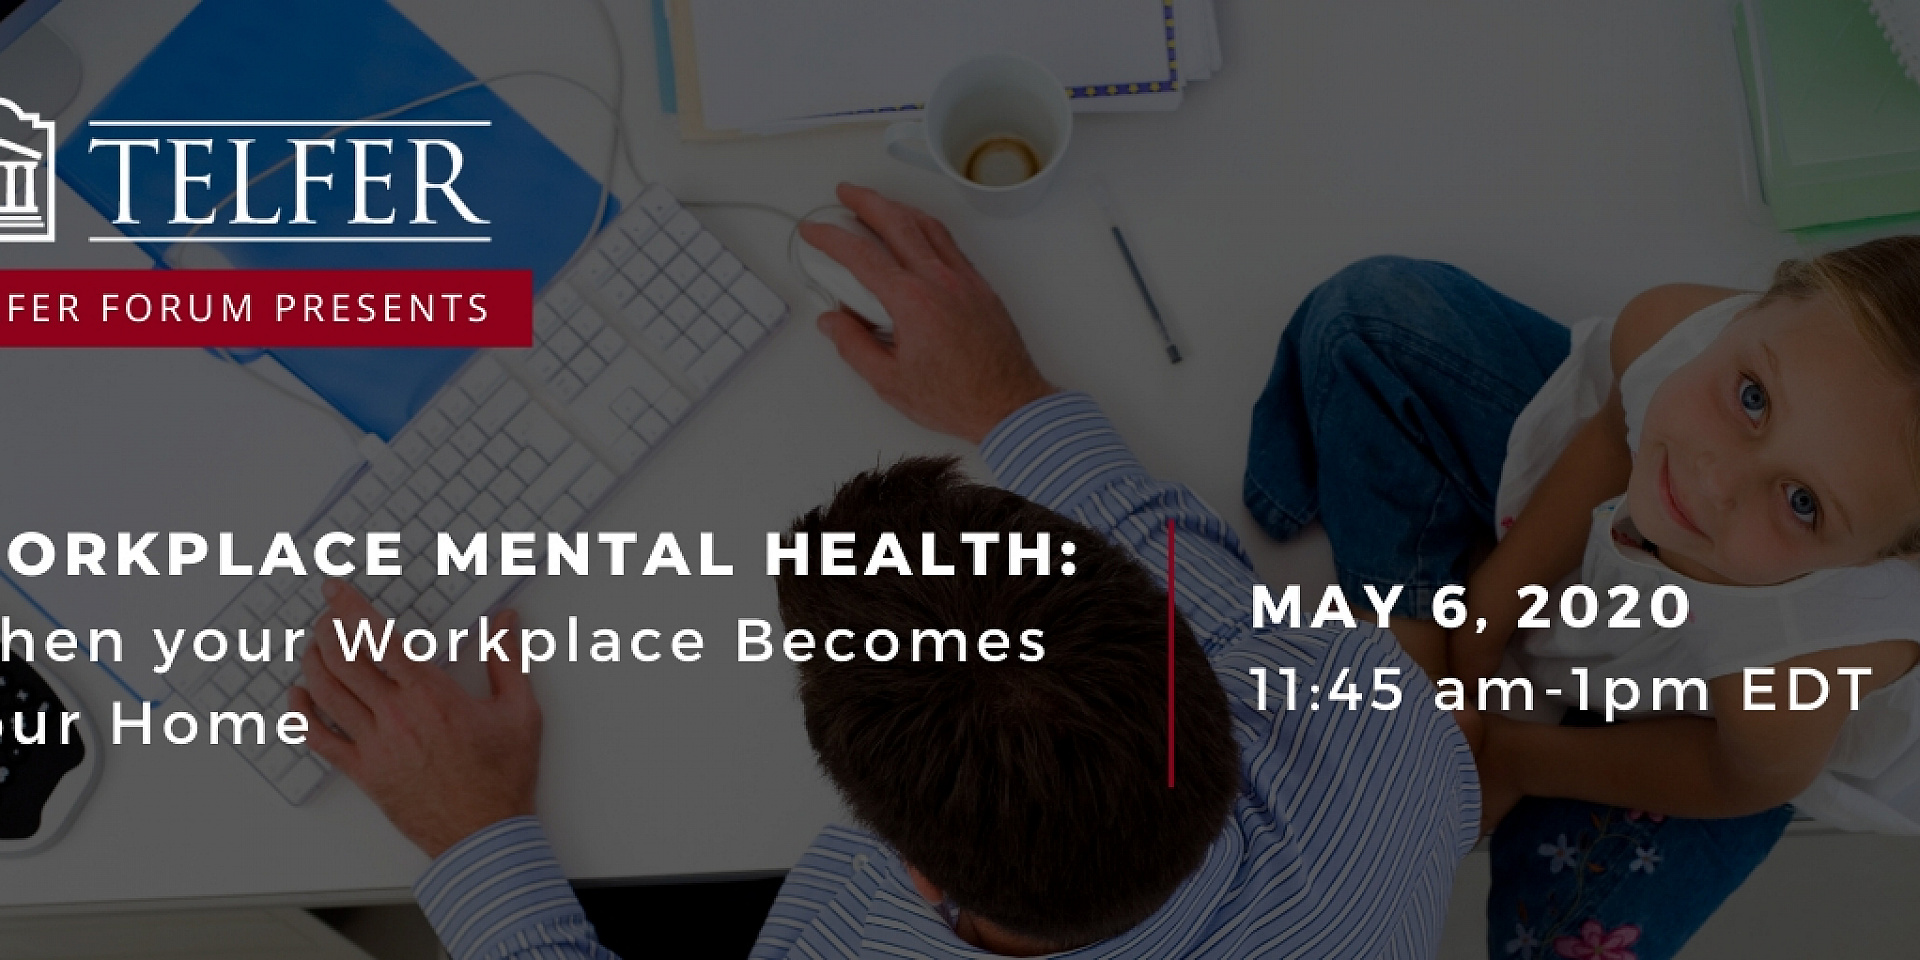 Telfer logo with the sentence "Work place mental health" 